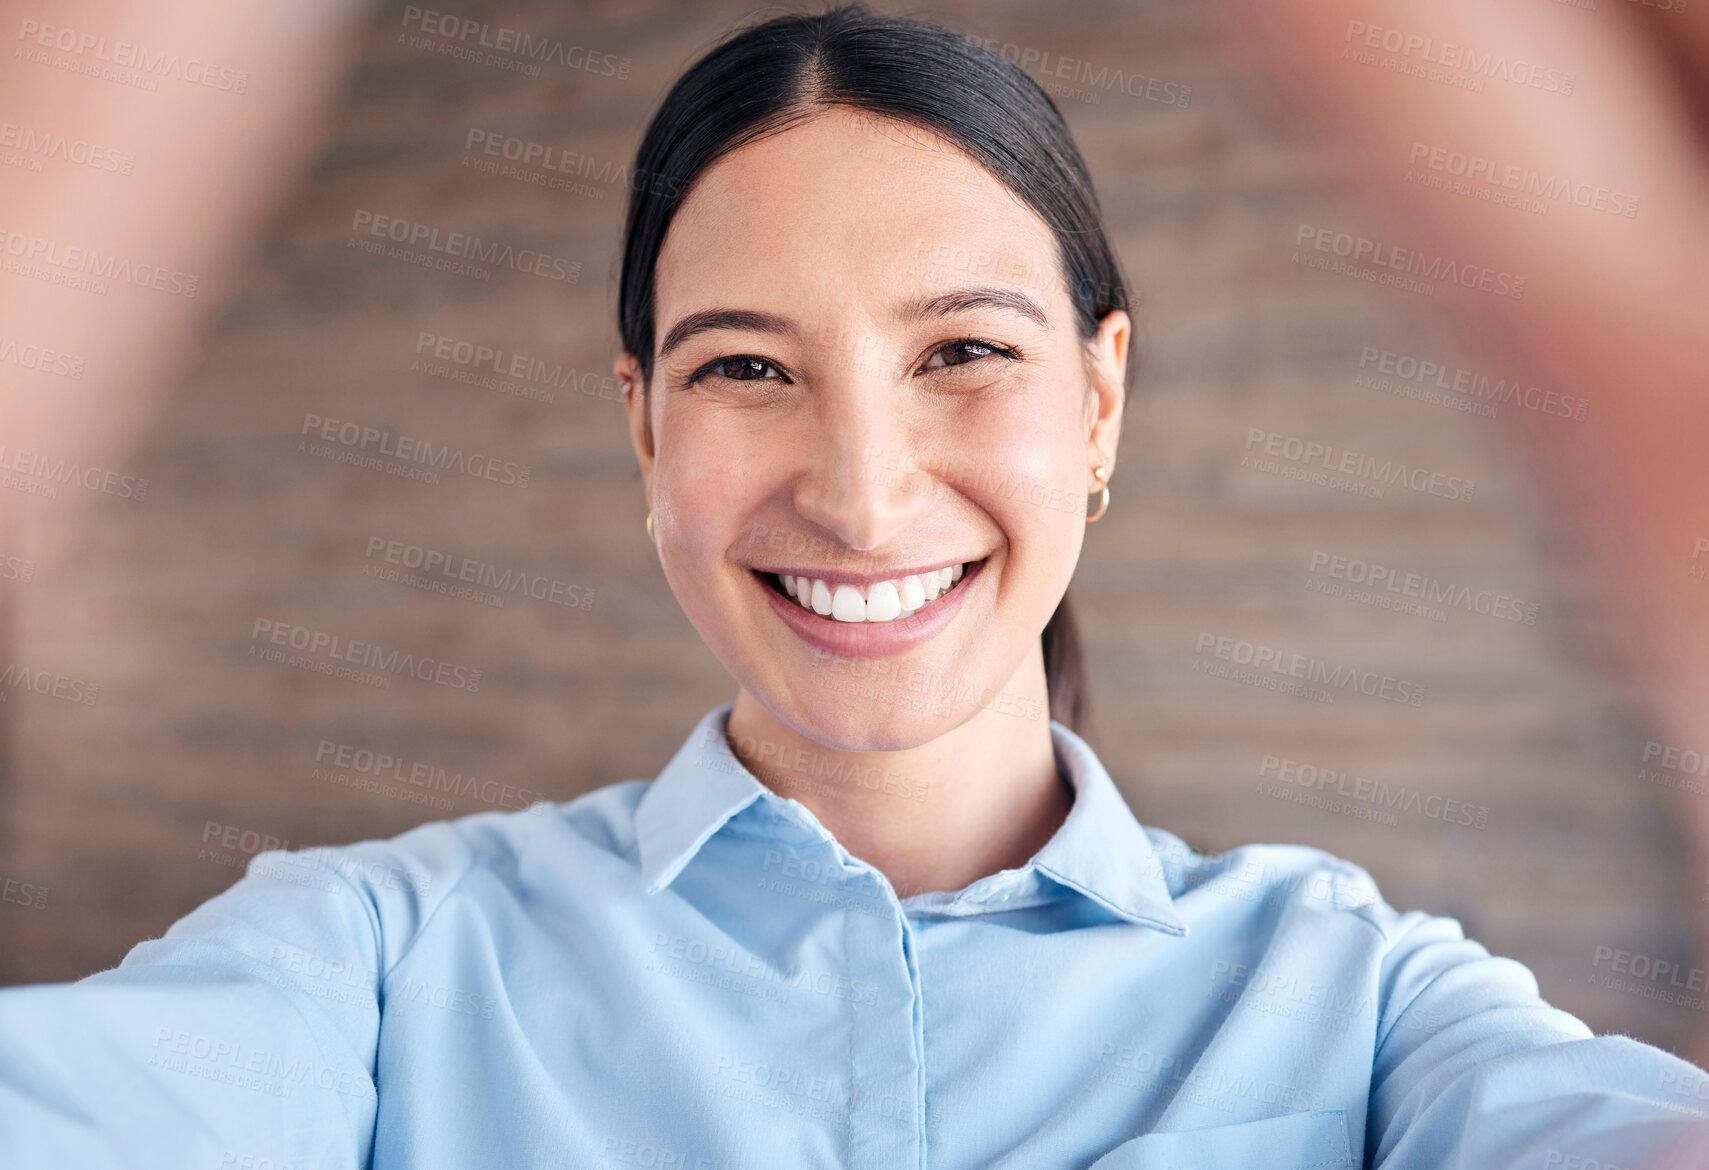 Buy stock photo Selfie, face and a business woman in her office to update her social media profile picture. Portrait, smile and a happy young employee posing for a photograph as a professional in the workplace